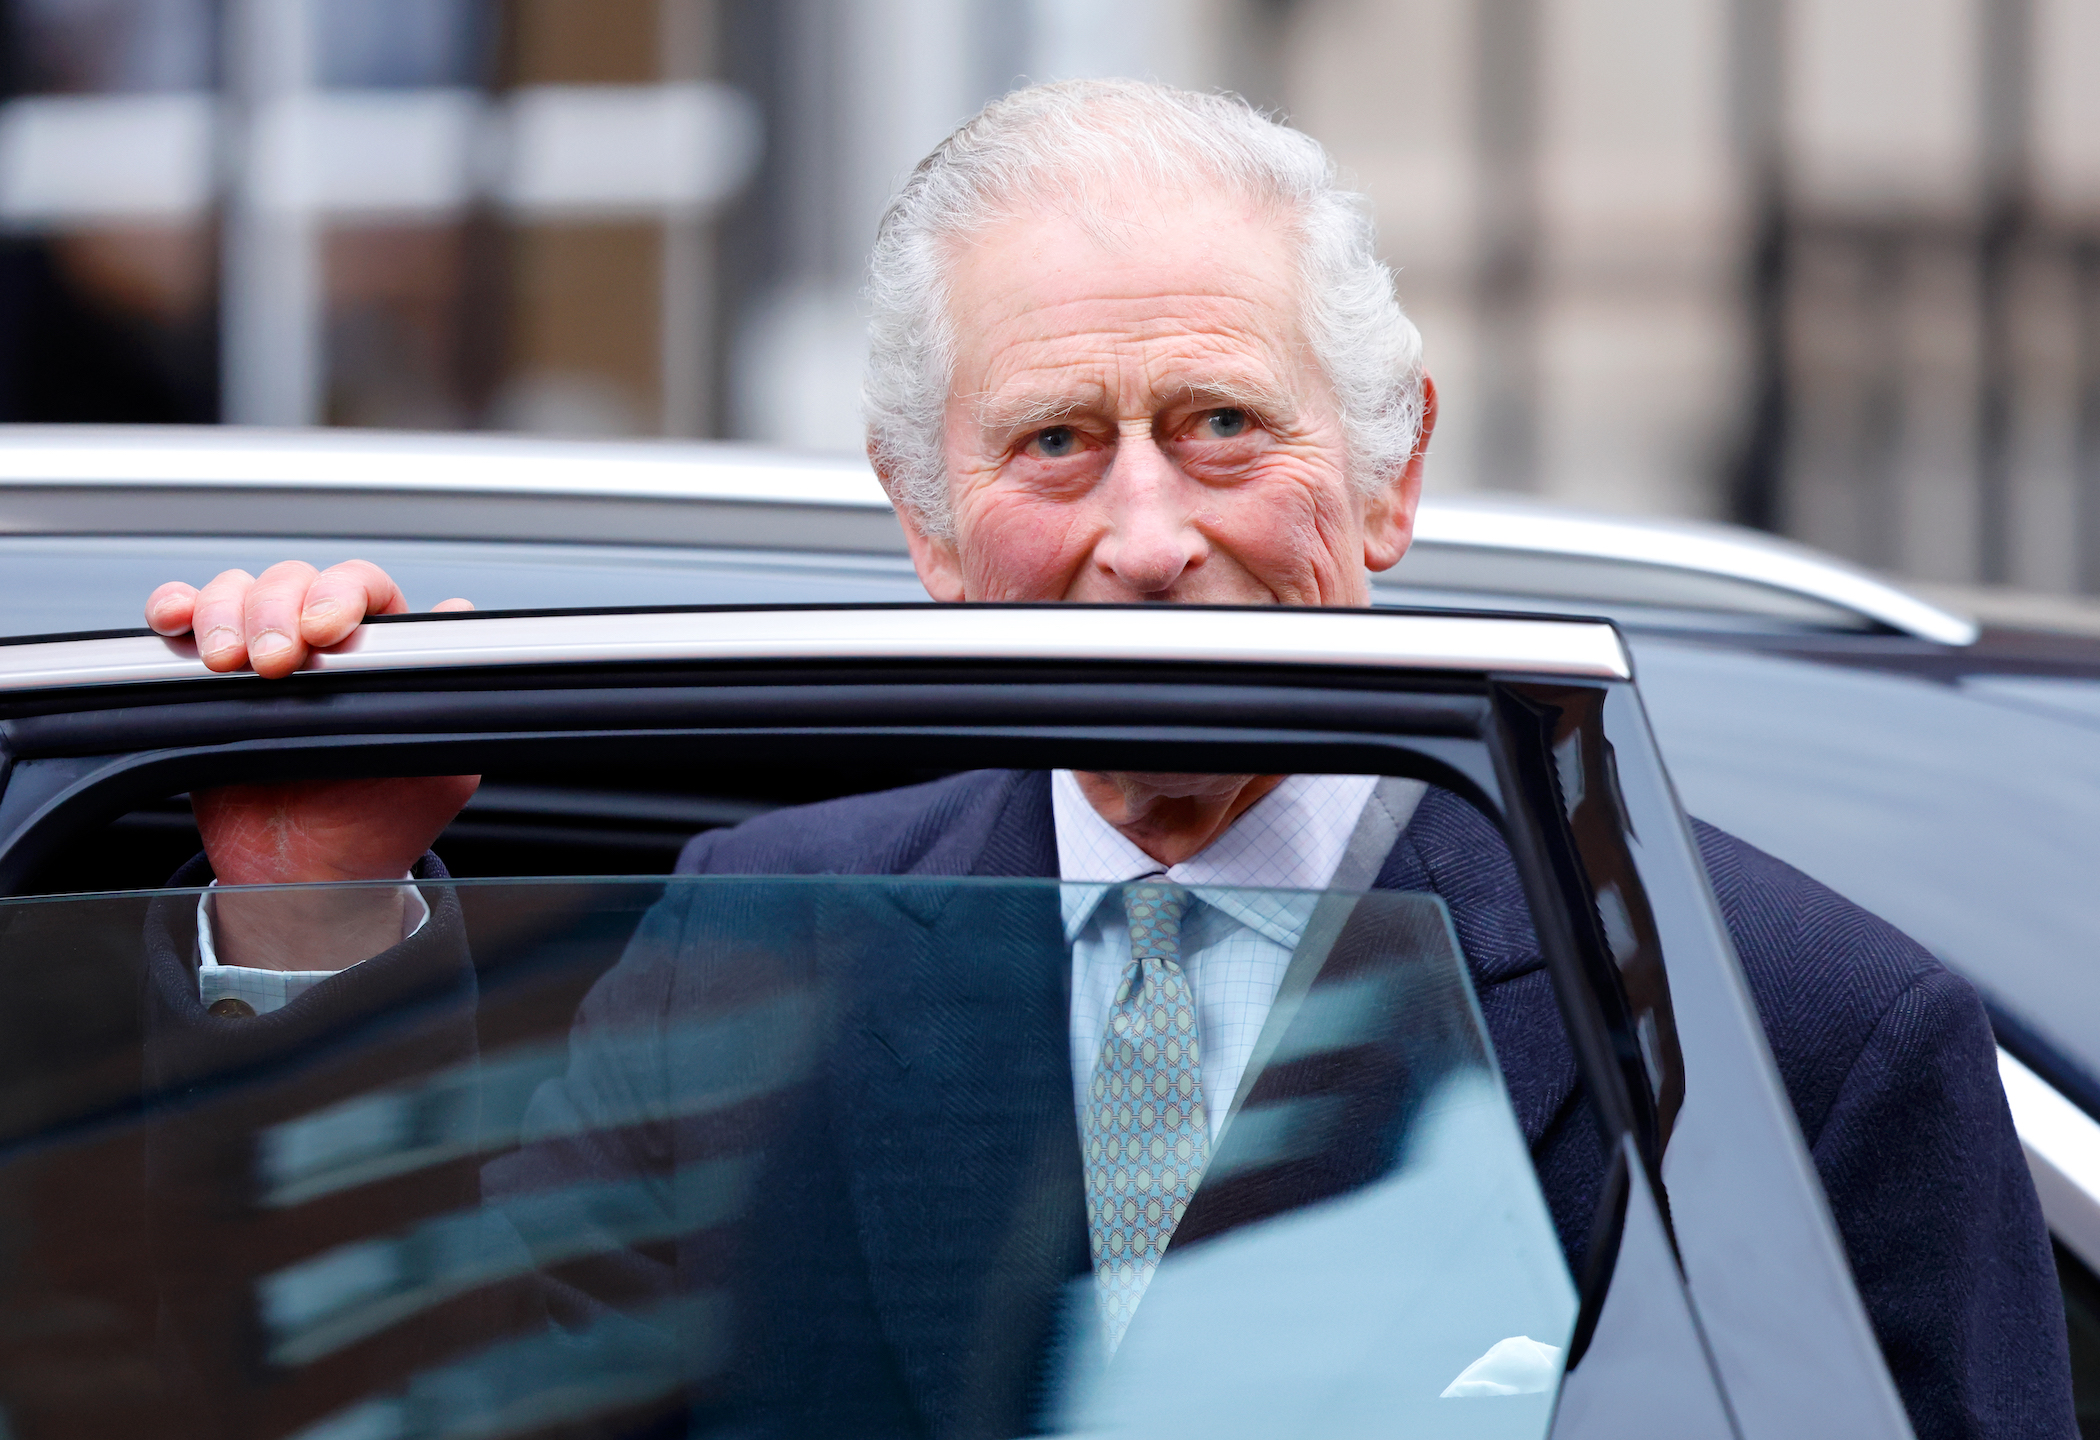 King Charles Iii Leaves Hospital After Treatment For Enlarged Prostate